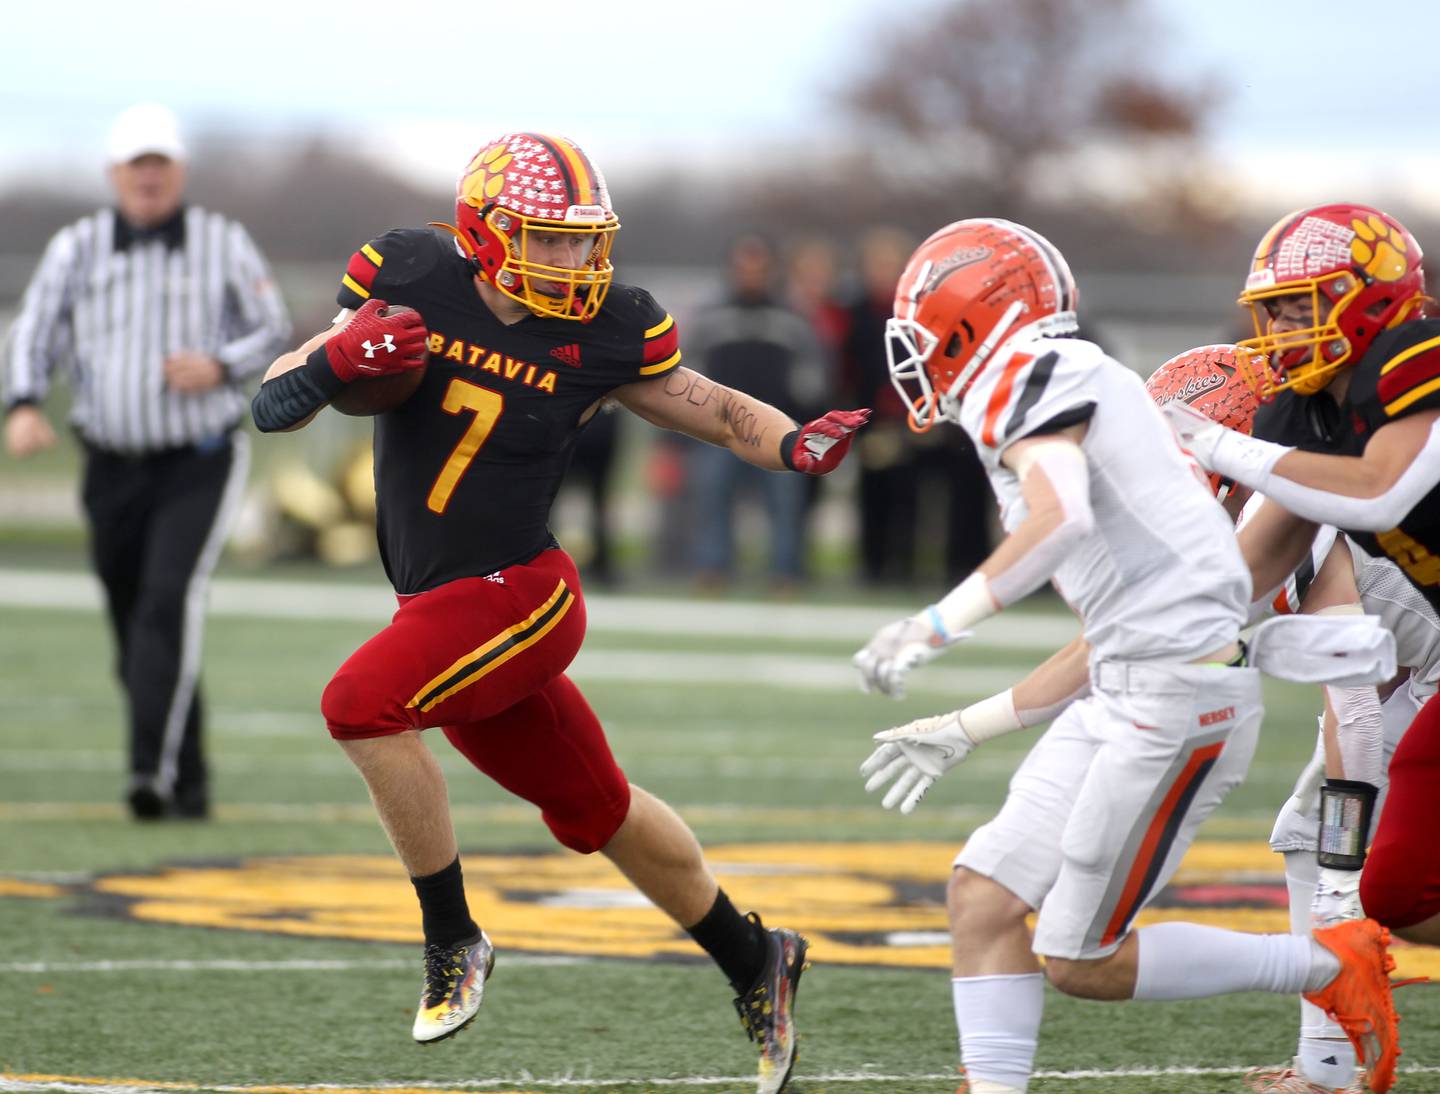 Batavia’s Tyler Jansey (7) runs the ball during their Class 7A second-round playoff game in Batavia against Hersey on Saturday, Nov. 5, 2022.